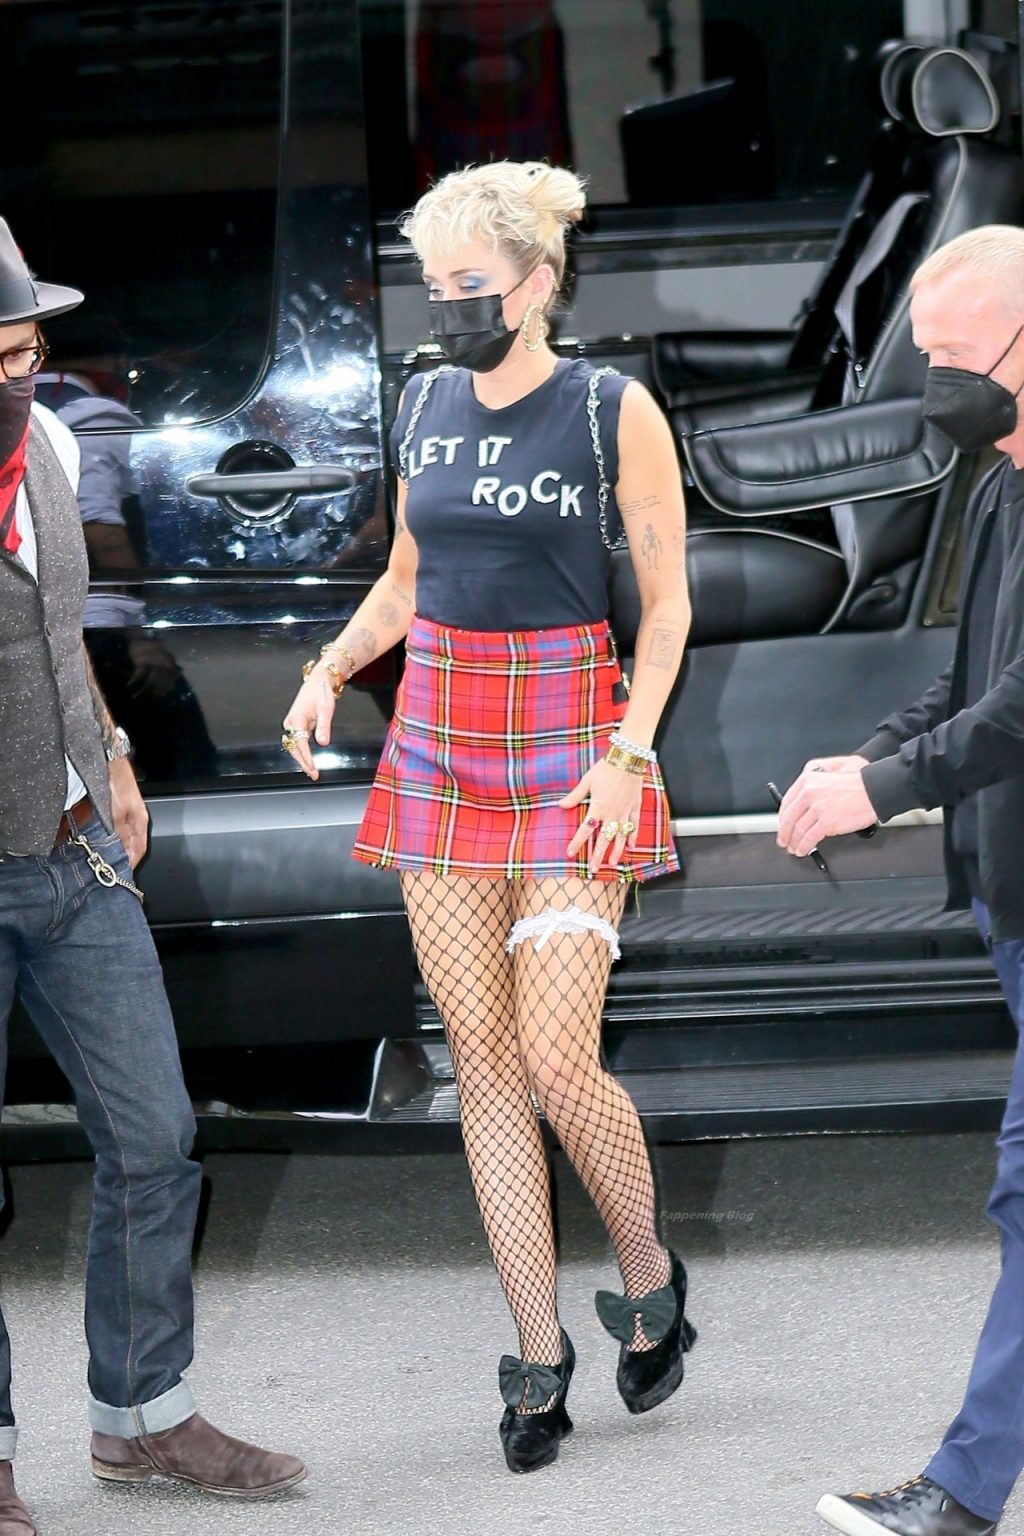 Miley Cyrus Grabs Attention in a Mini Skirt and Fishnets in NYC (22 Photos)